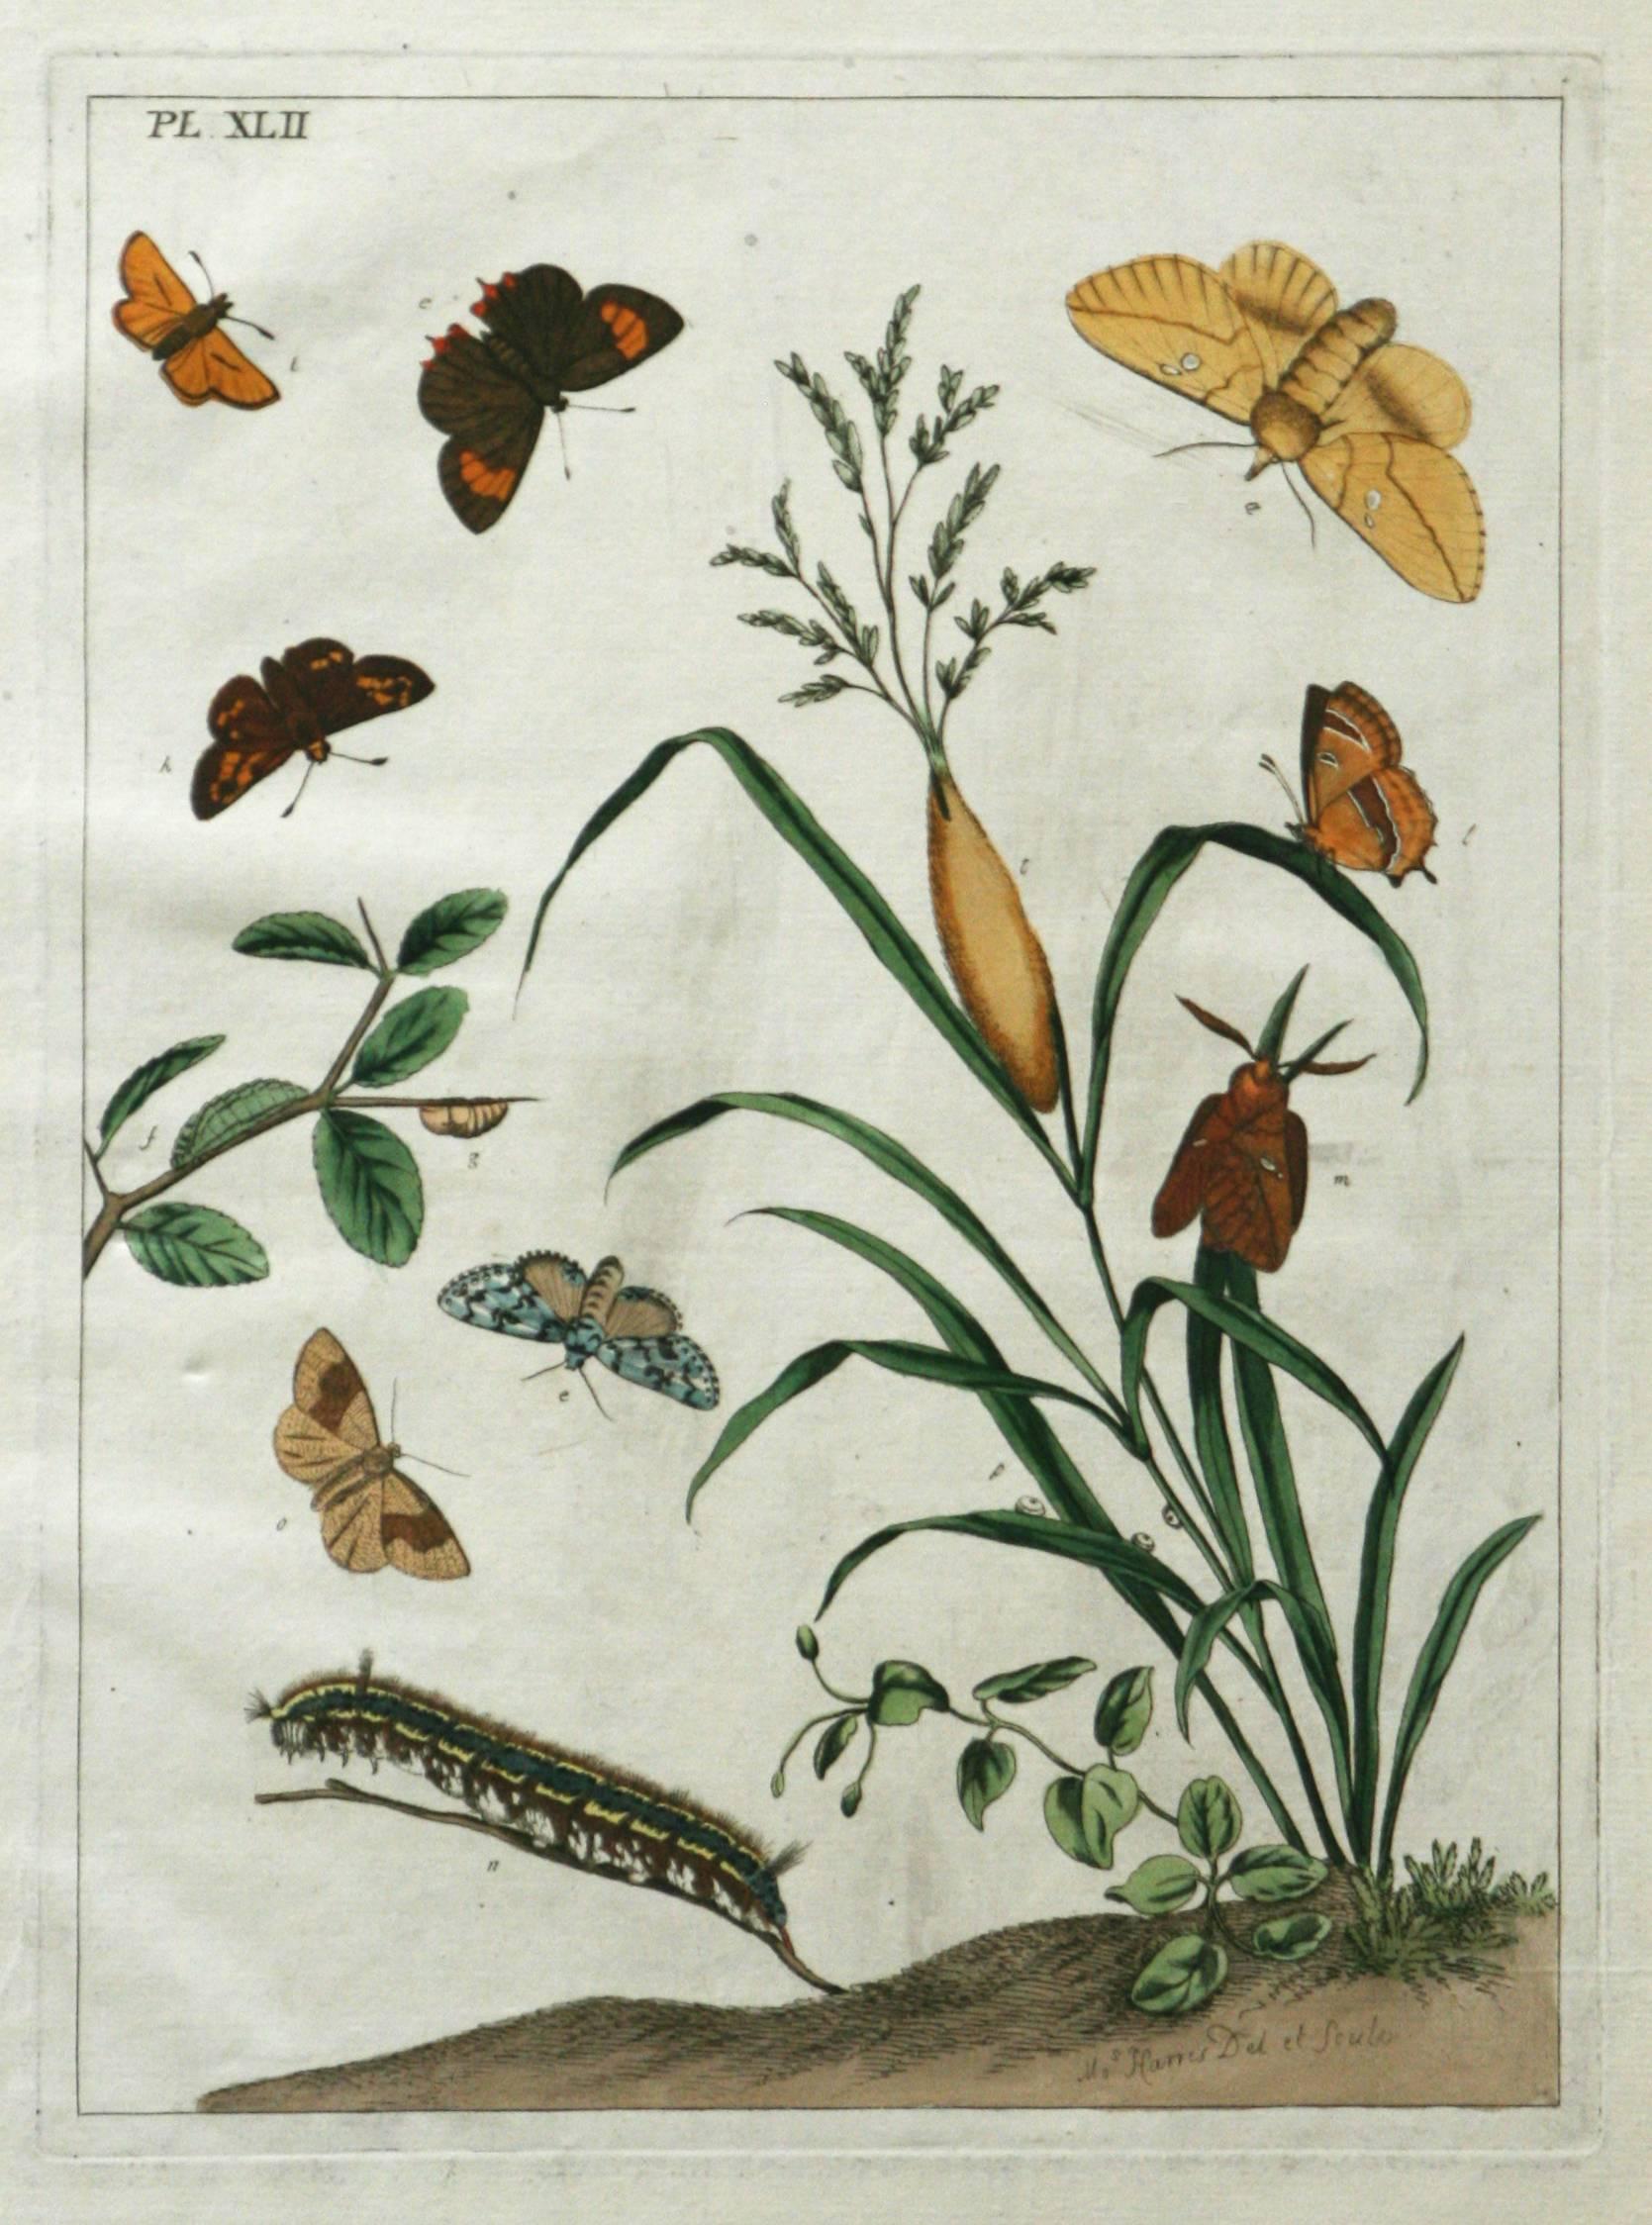 Moses Harris Print - The Aurelian, A Natural History of English Moths and Butterflies  Plate XLII